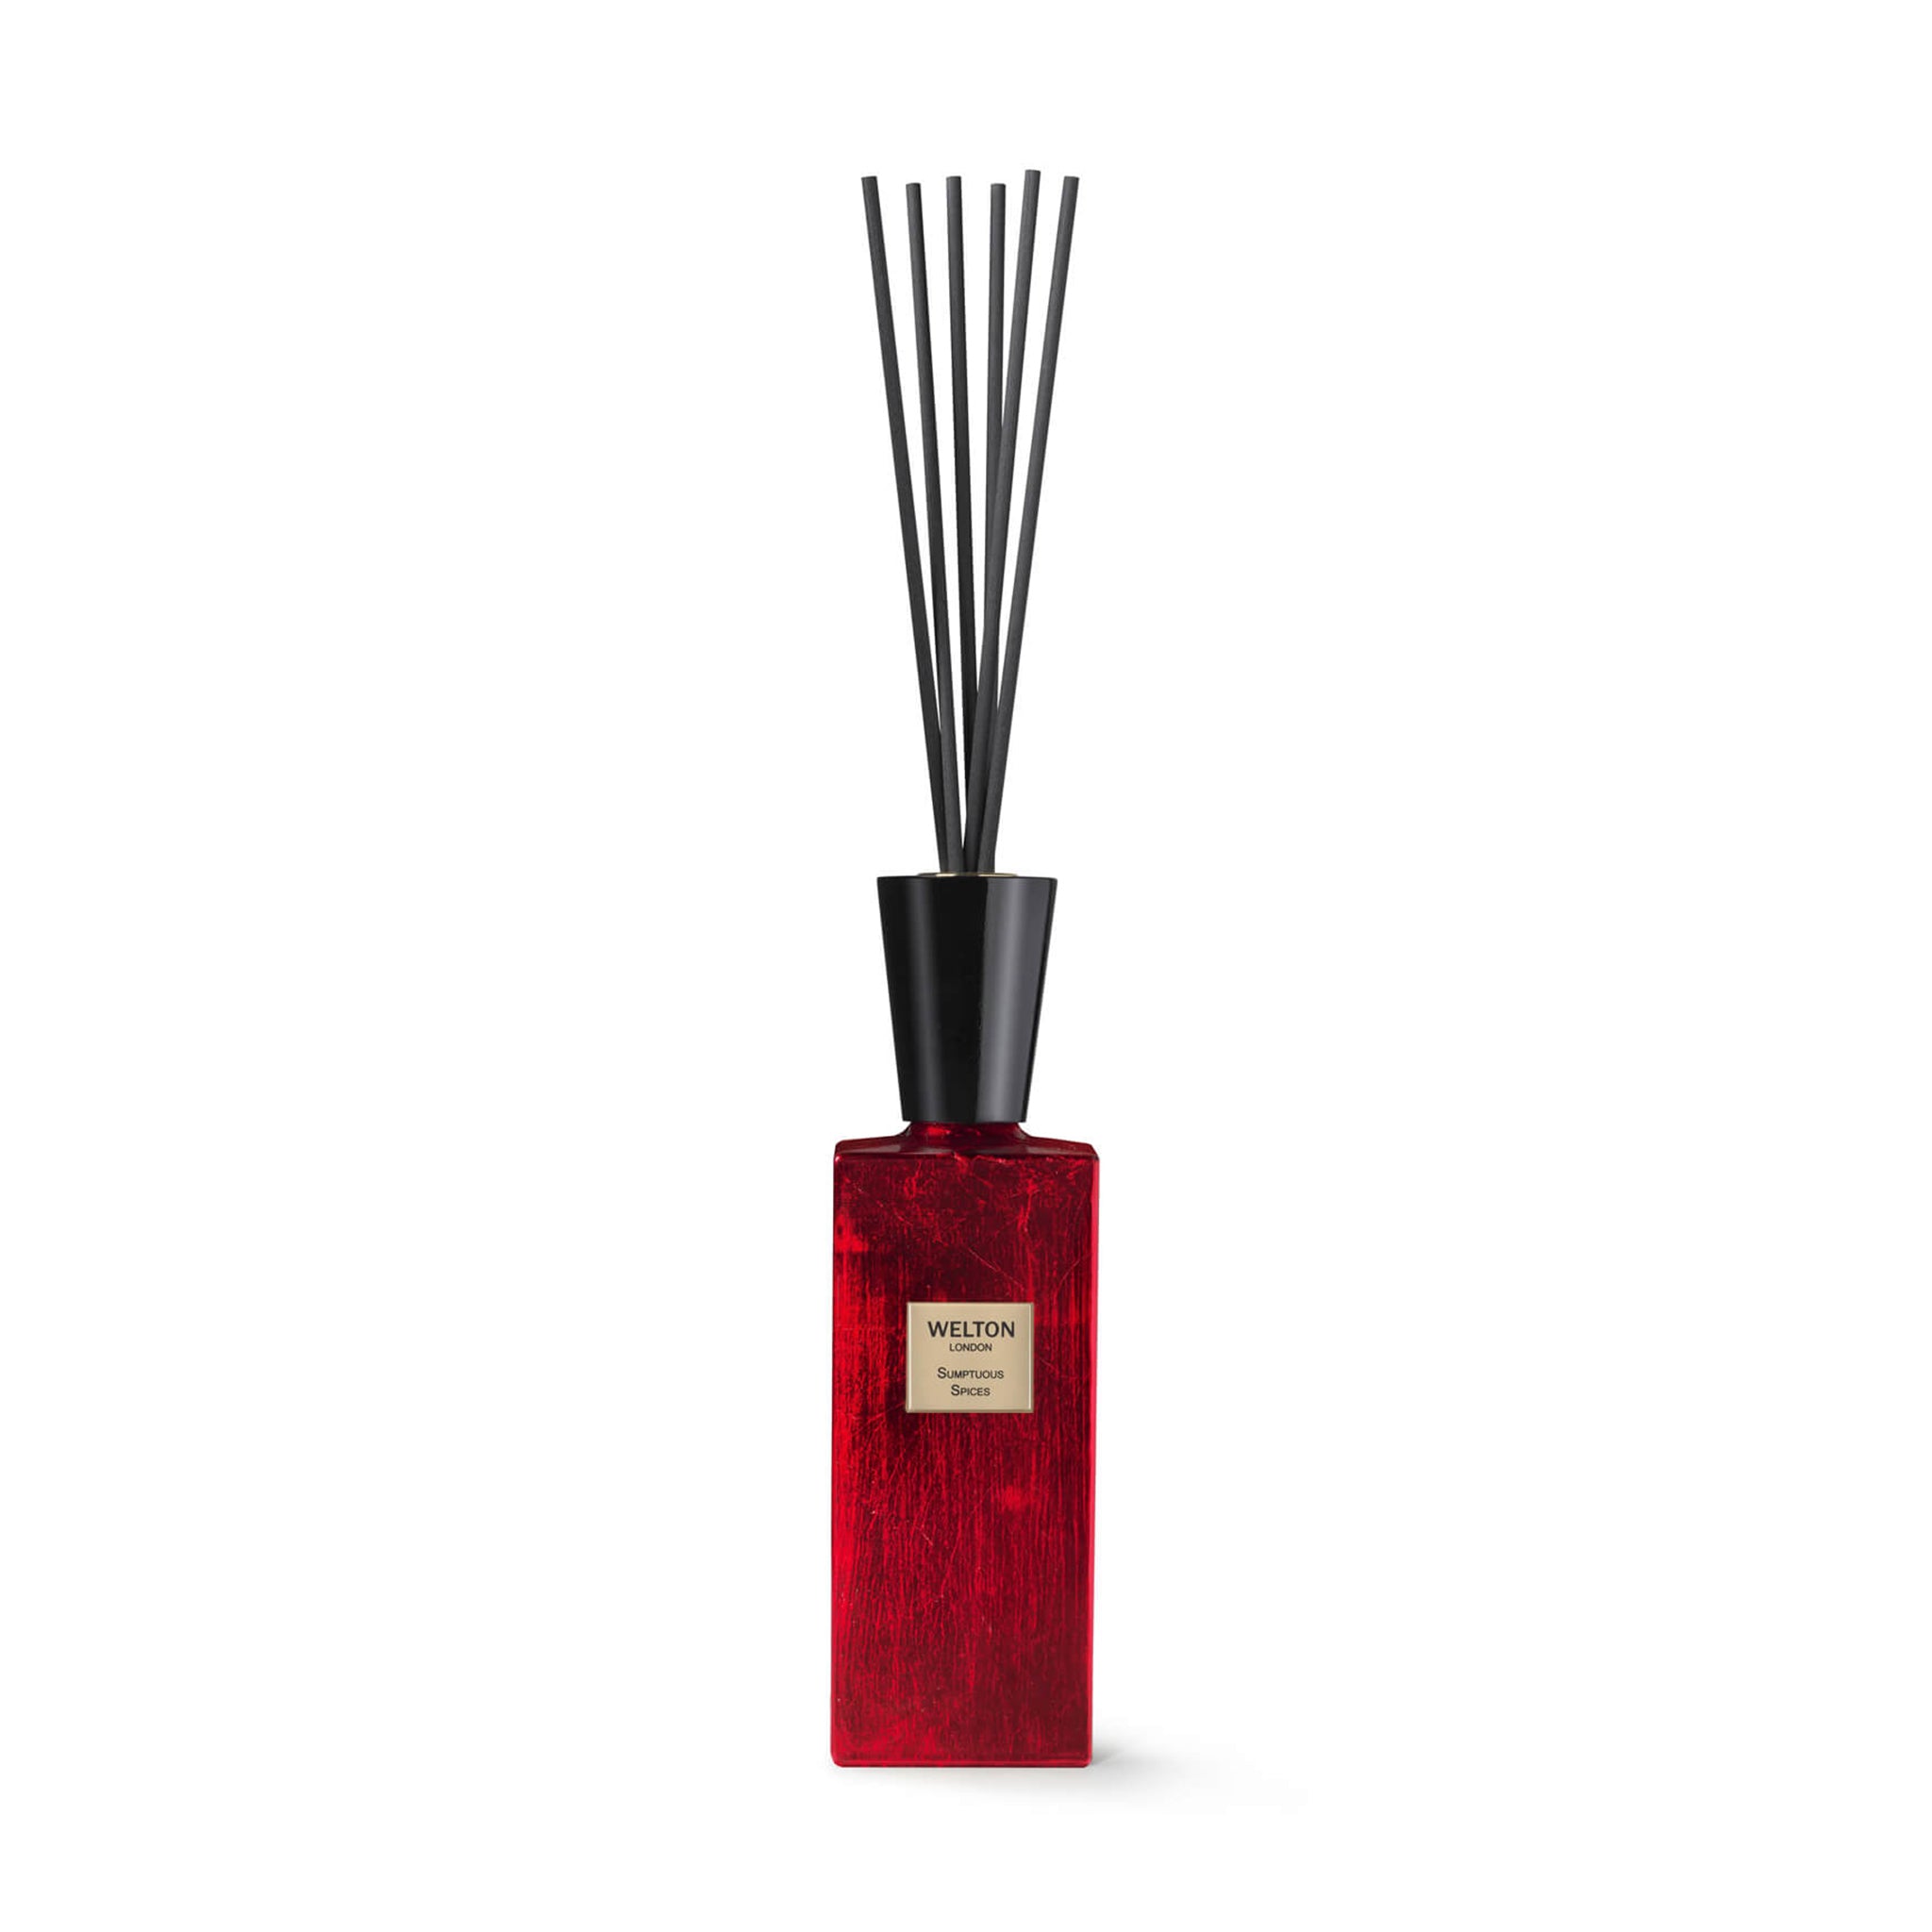 welton london diffuser sumptuous spices xlspicy sweet diffusers 